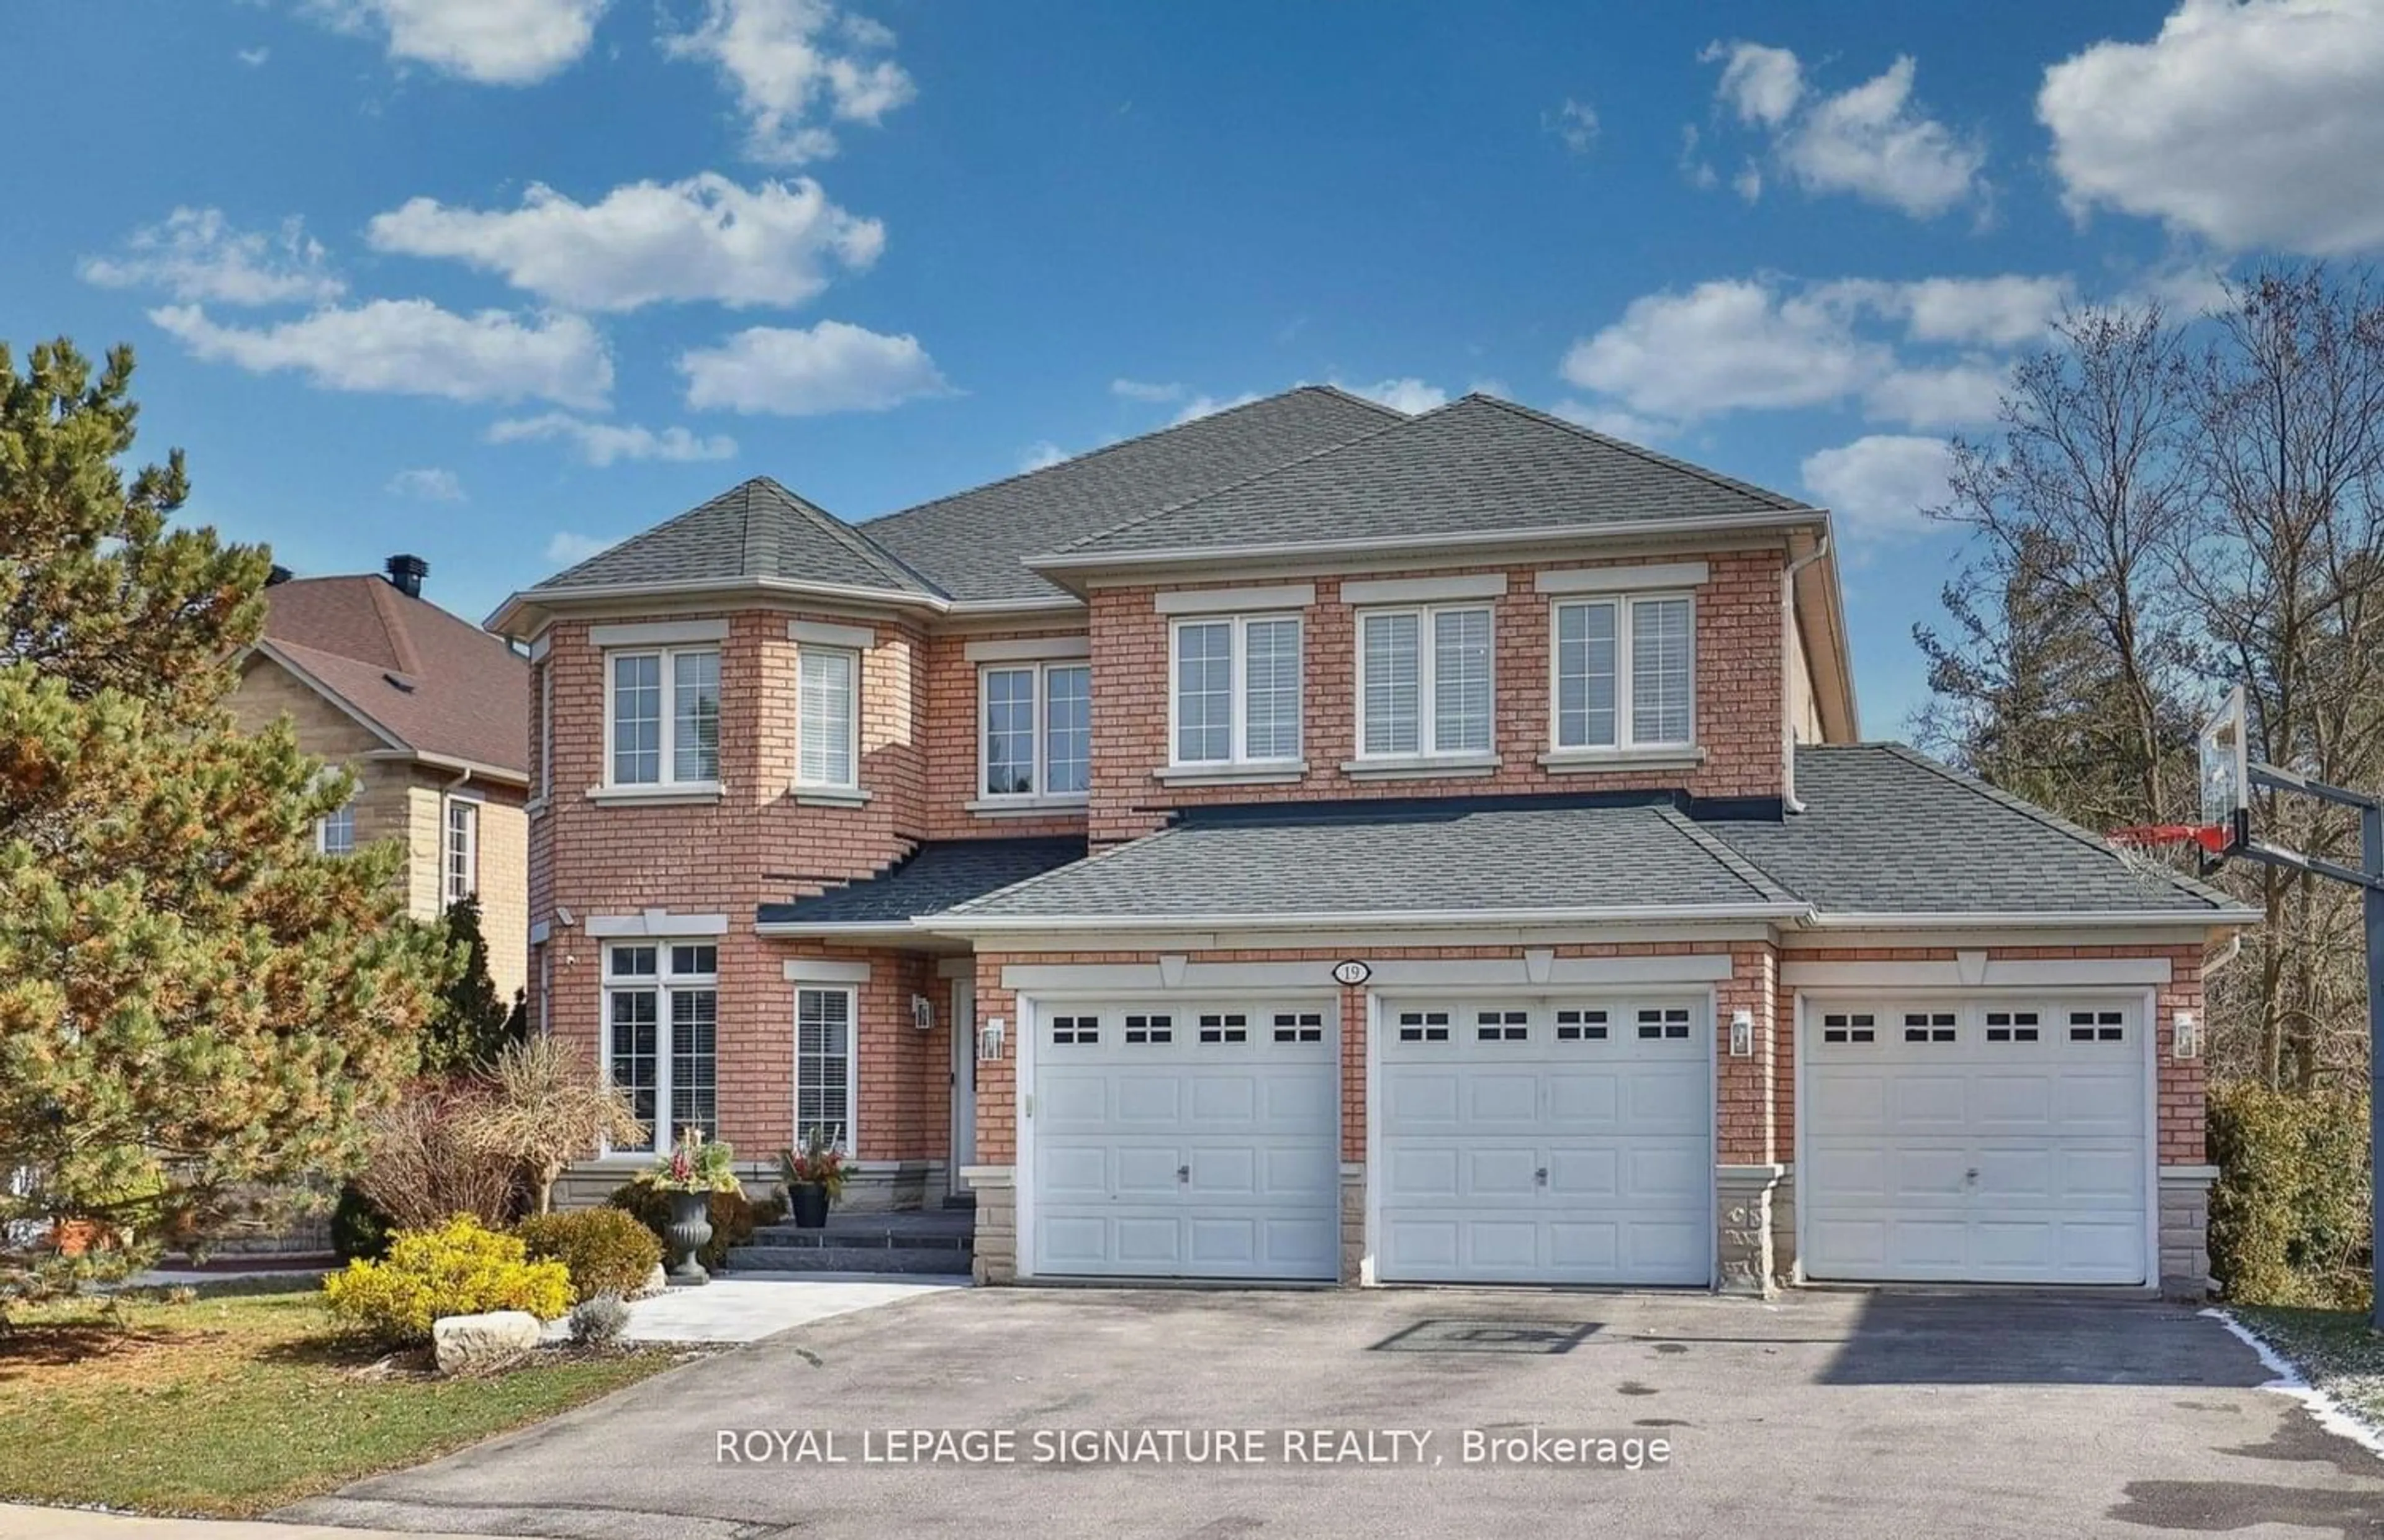 Home with brick exterior material for 19 Lemsford Dr, Markham Ontario L3S 3T8